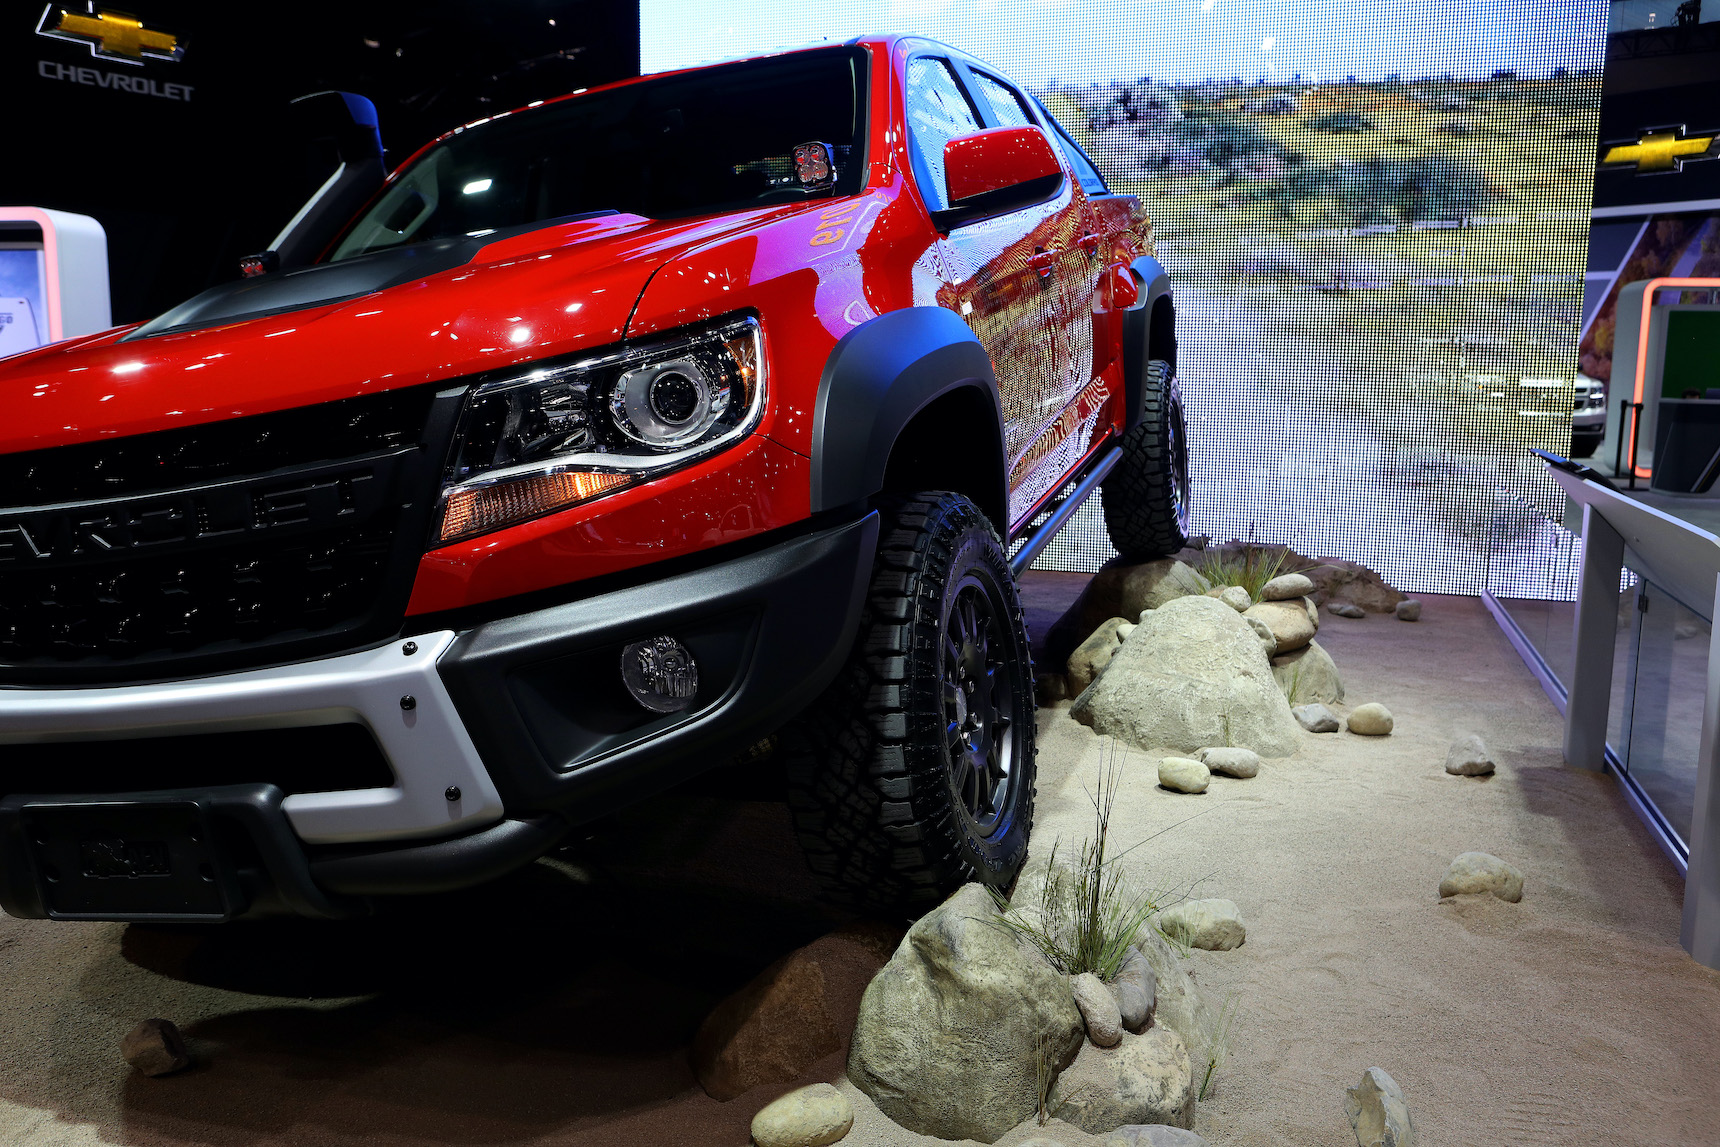 2019 Chevy Colorado ZR2 Bison is on display at the 111th Annual Chicago Auto Show